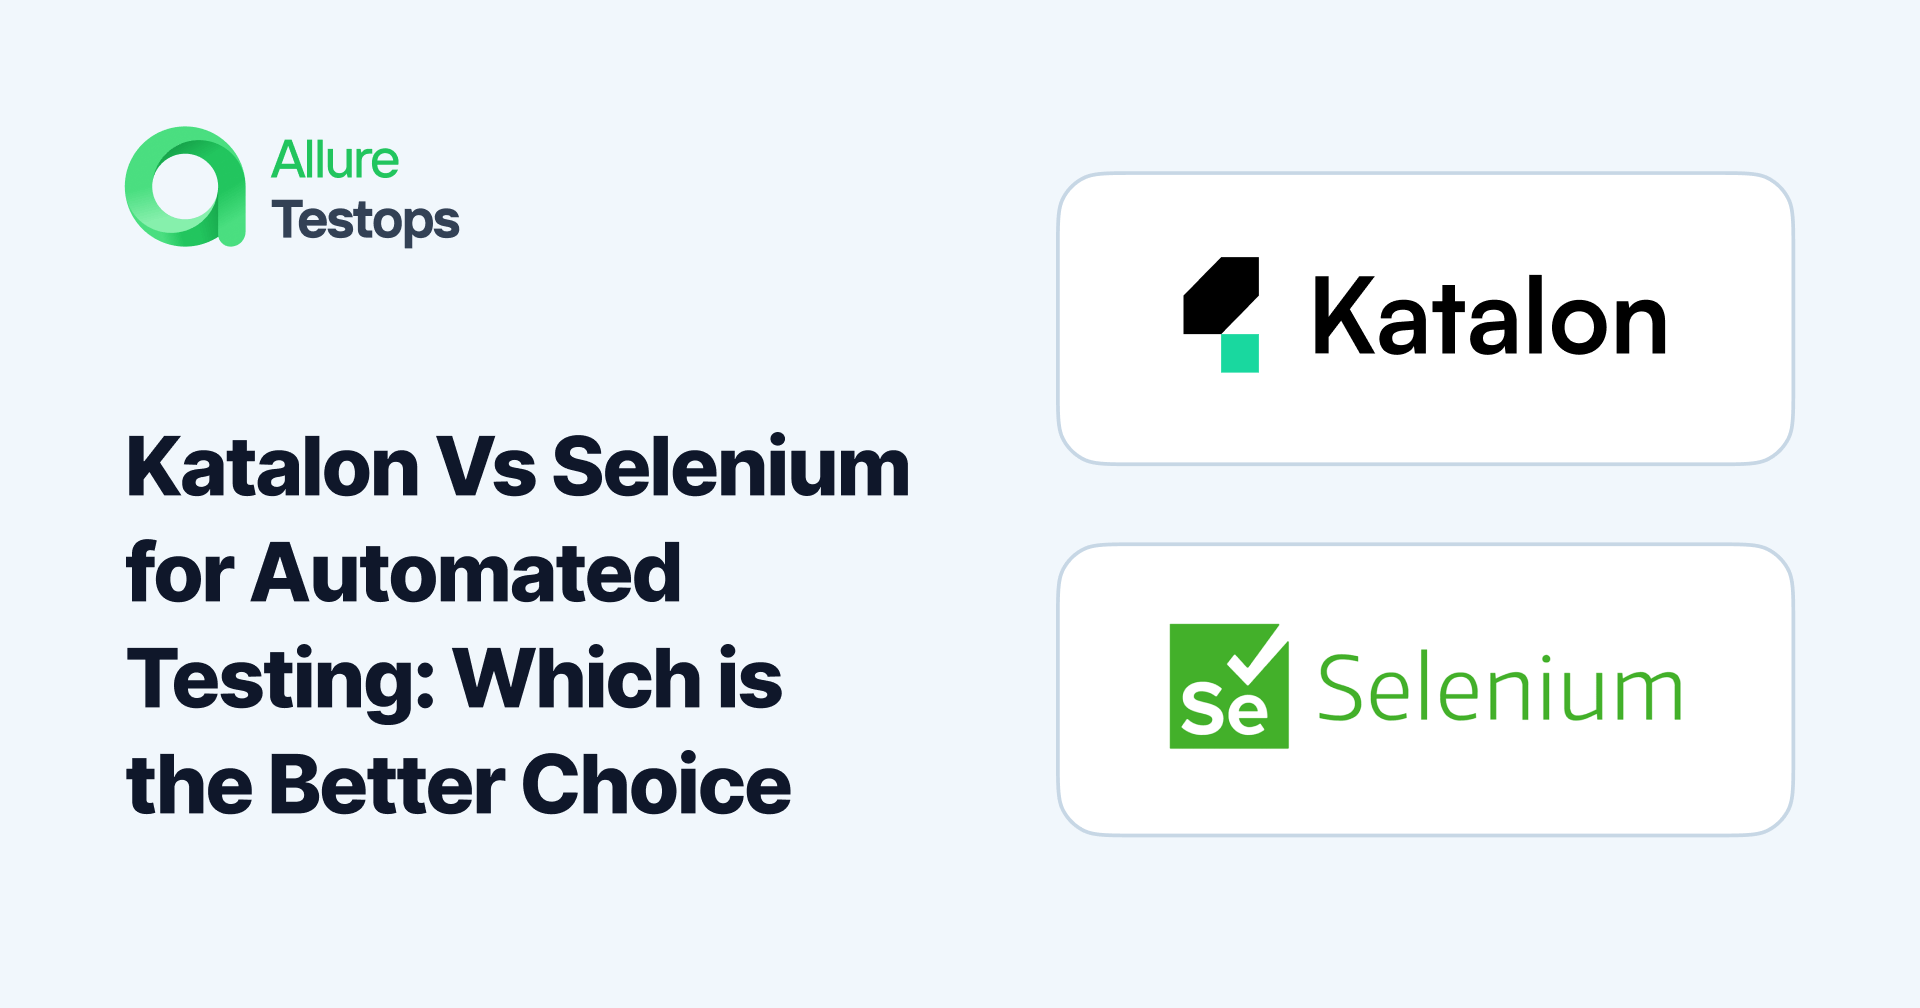 Katalon vs Selenium for Automated Testing: Which is the Better Choice